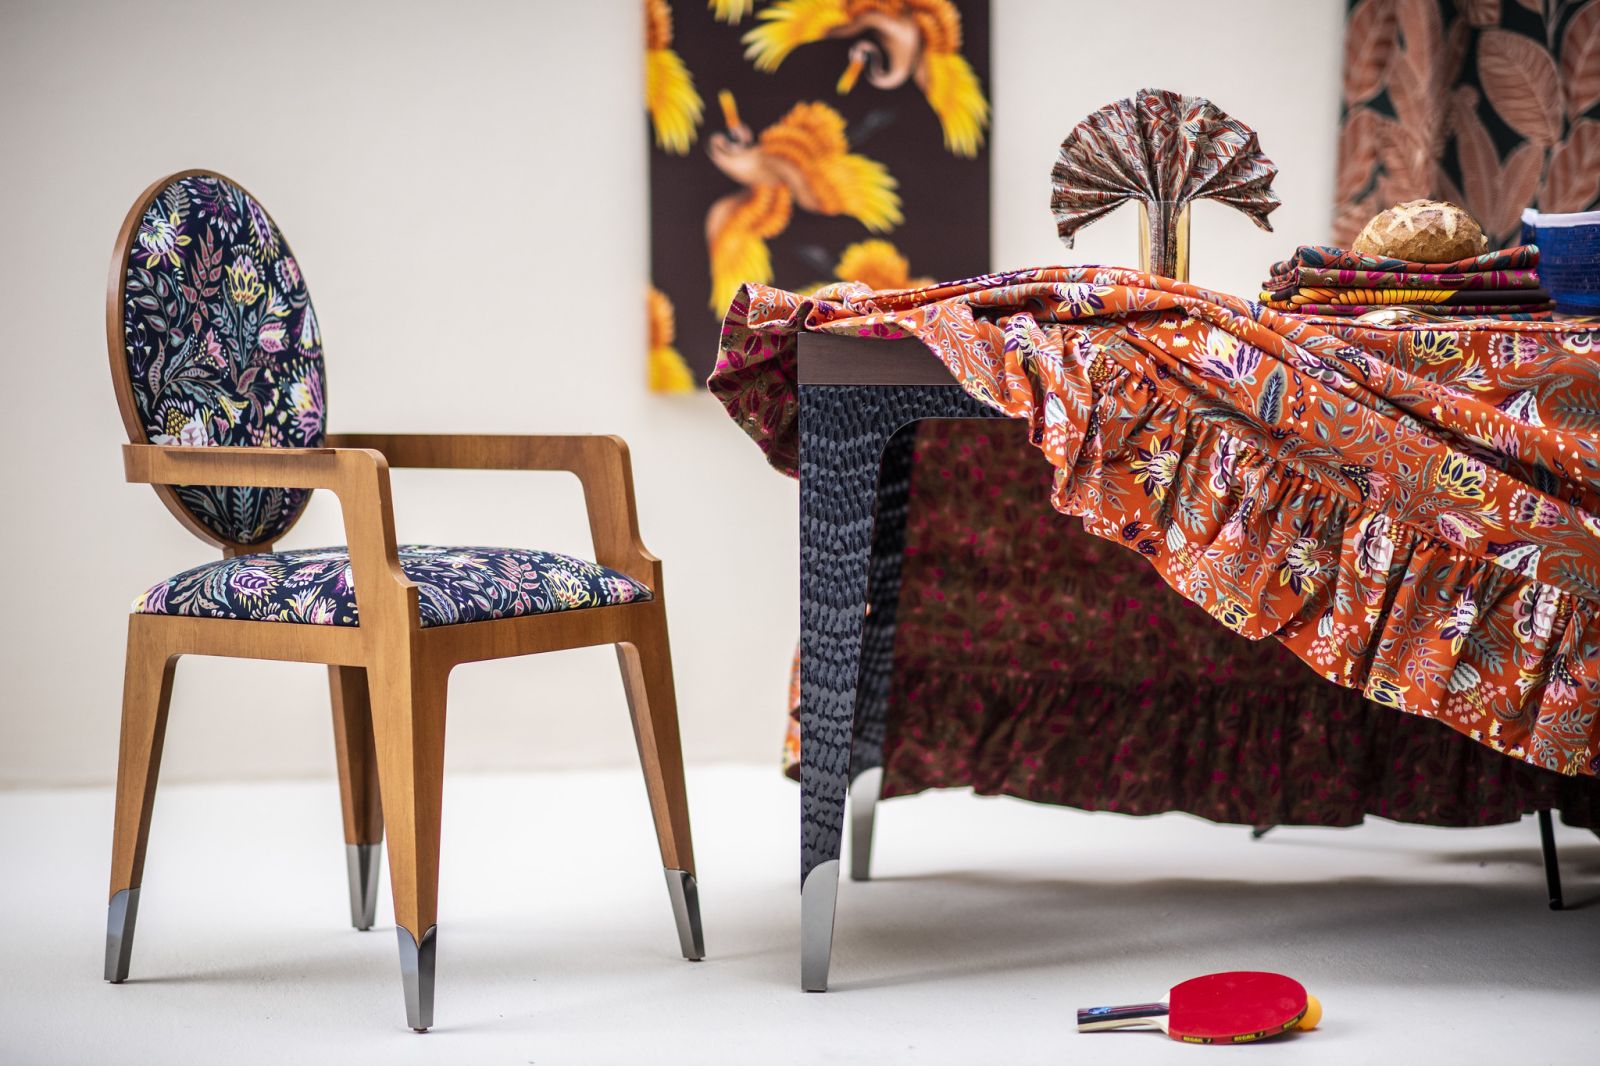 Zynna launches Thevenon’s exquisite blooming French fabrics in India